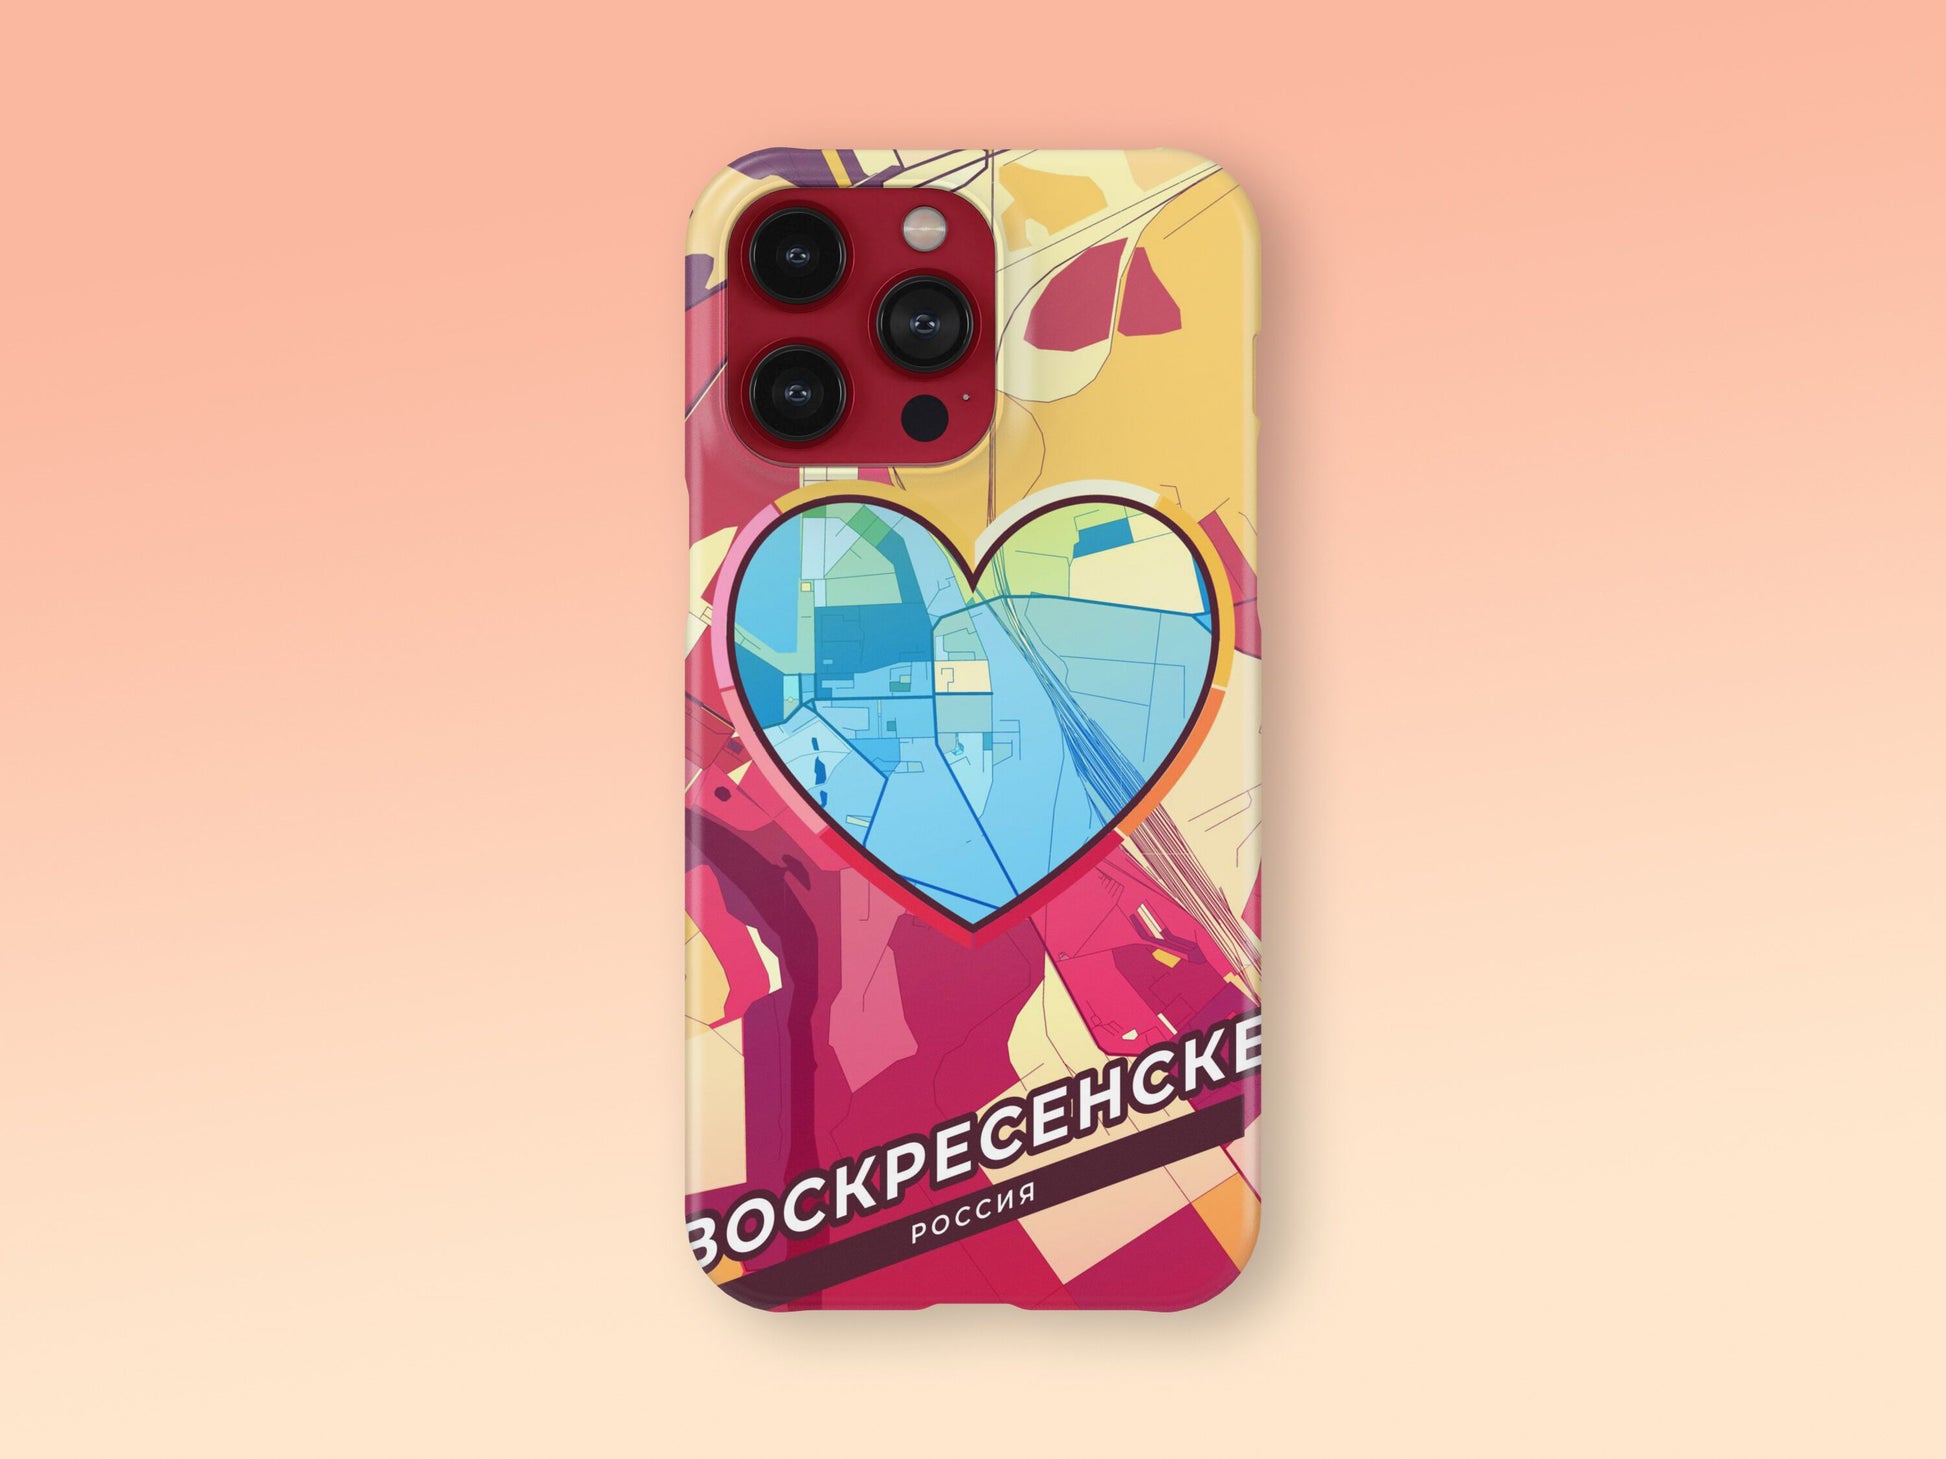 Voskresensk Russia slim phone case with colorful icon 2